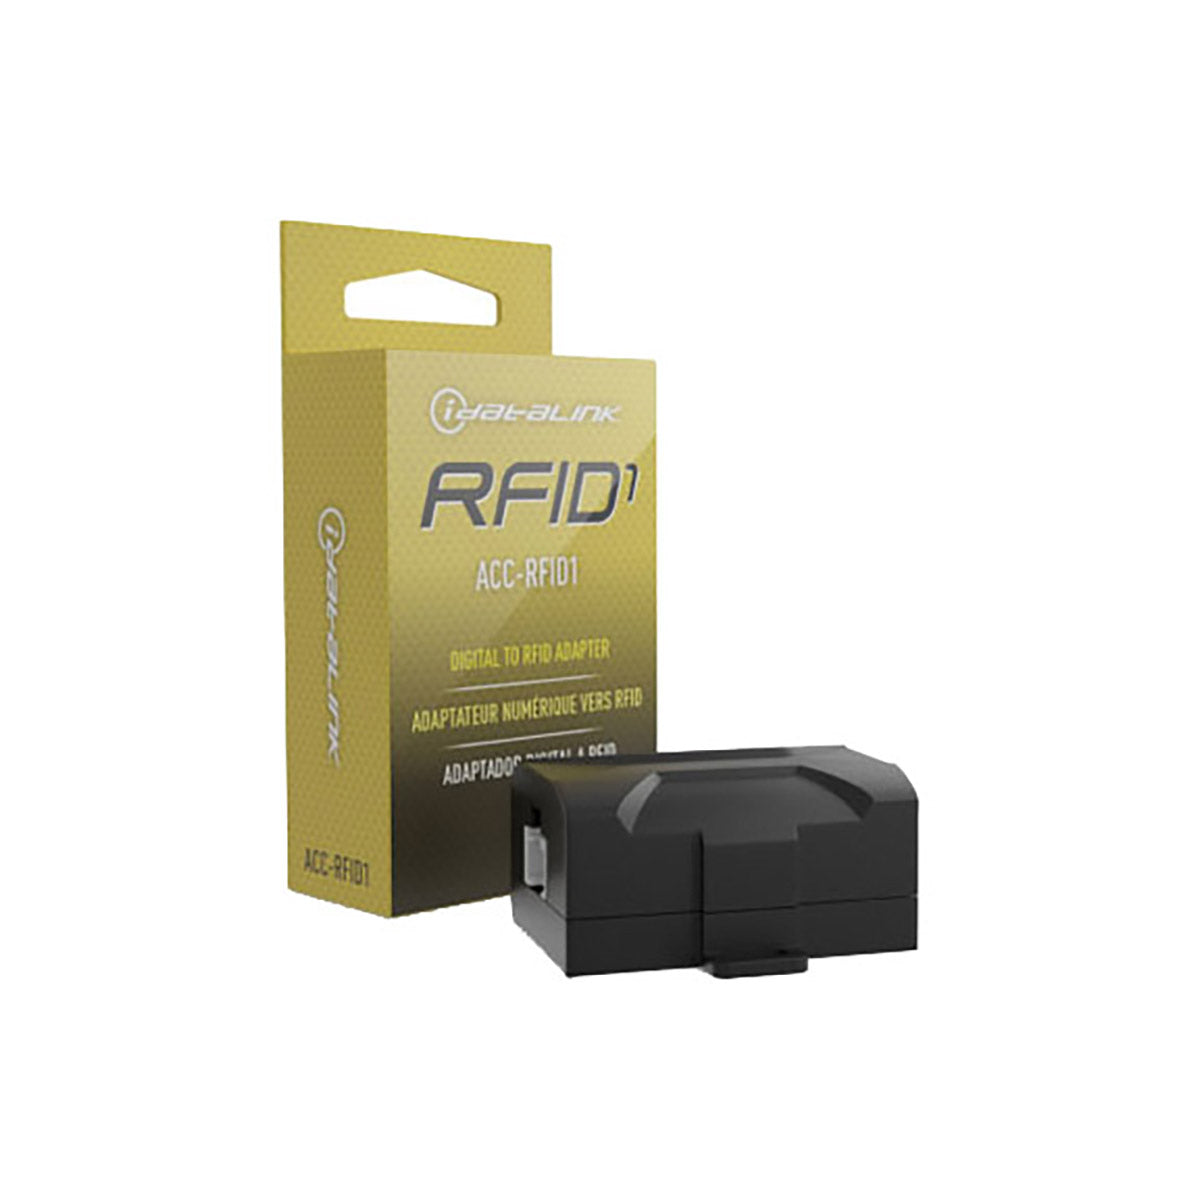 Omegalink Rfid Cloning Accessory (requires Olusbhub)